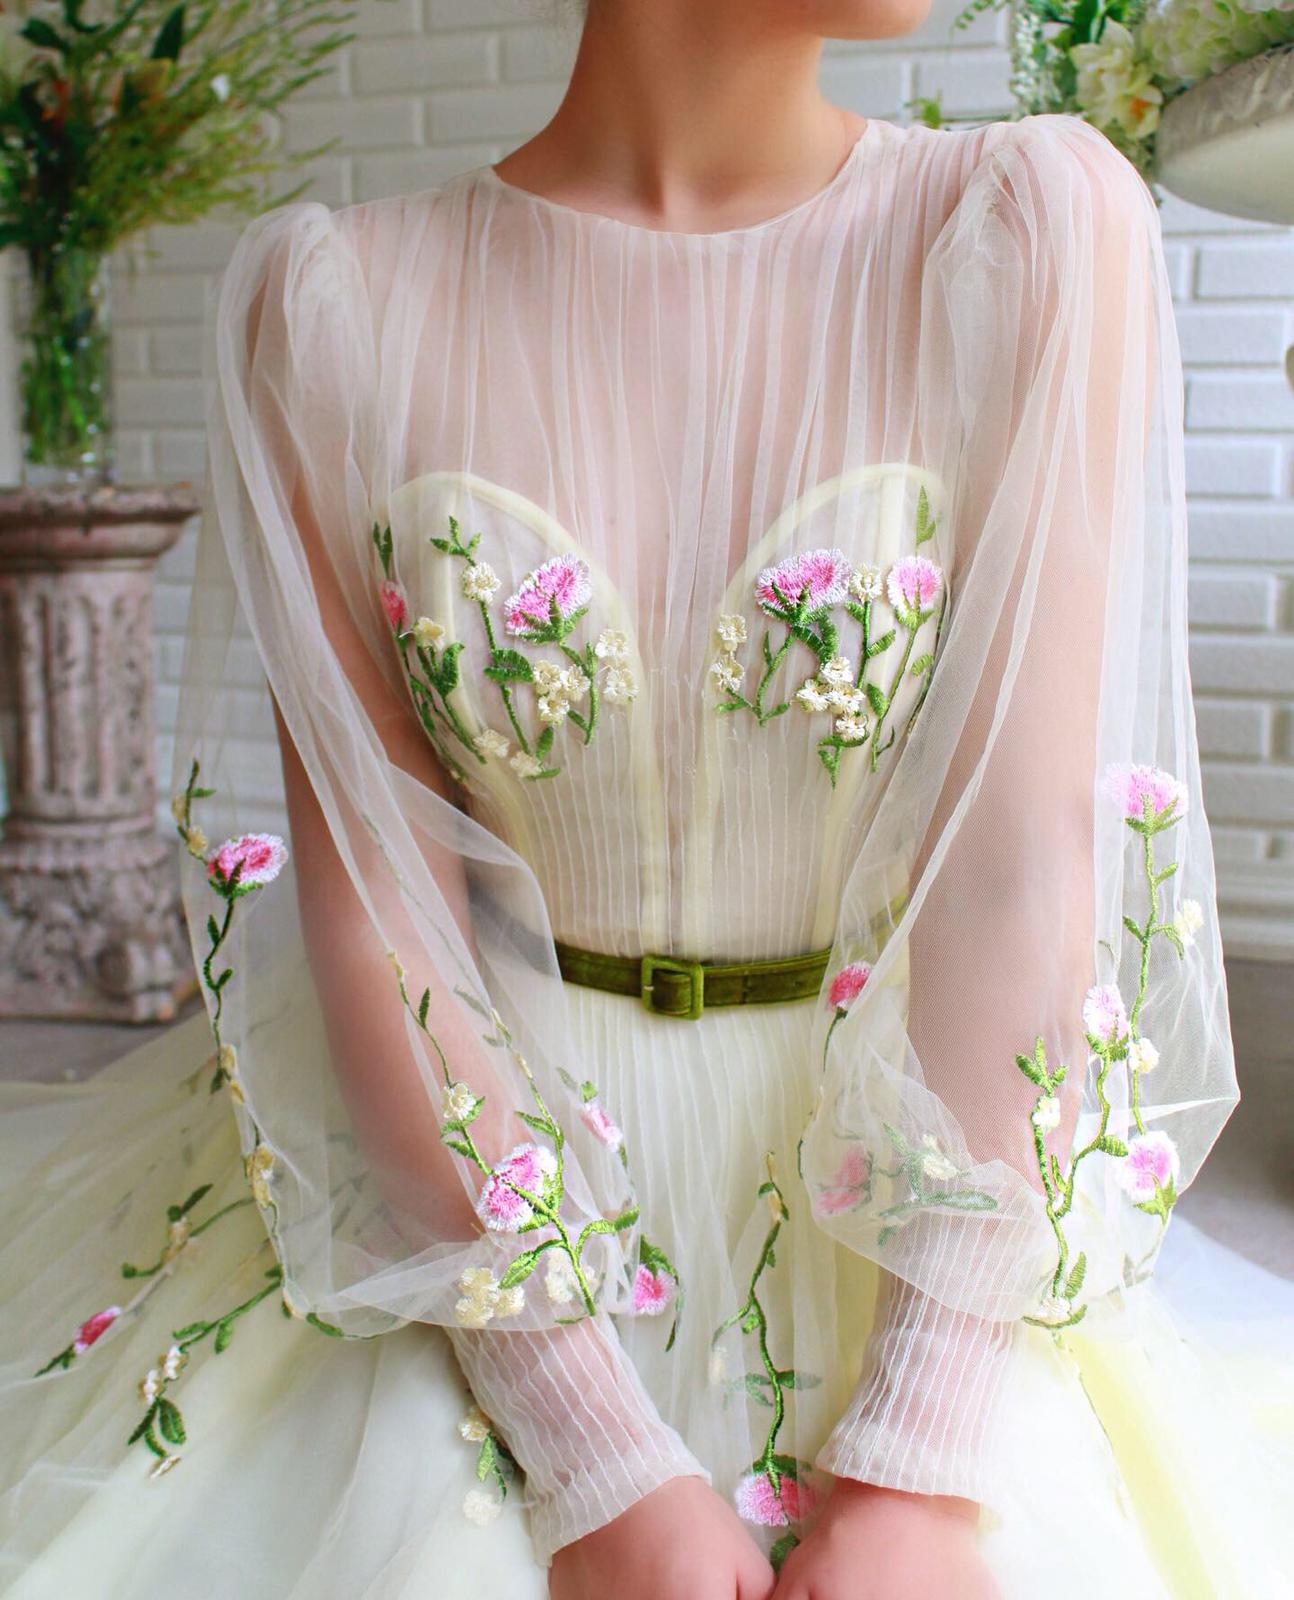 Beige A-Line dress with long sleeves, belt and embroidery